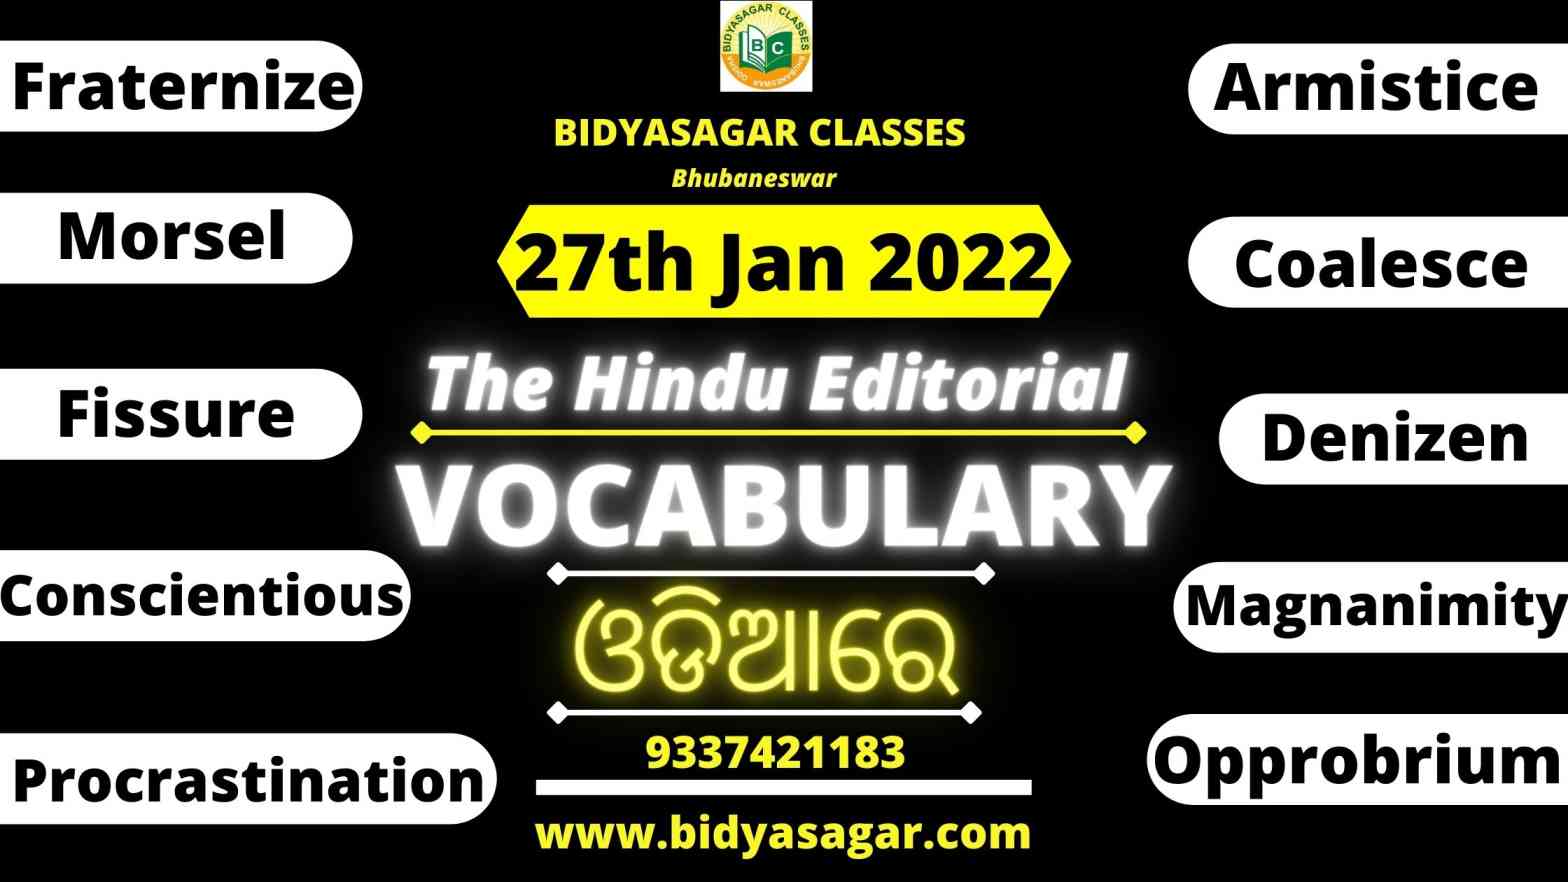 The Hindu Editorial Vocabulary of 27th January 2022